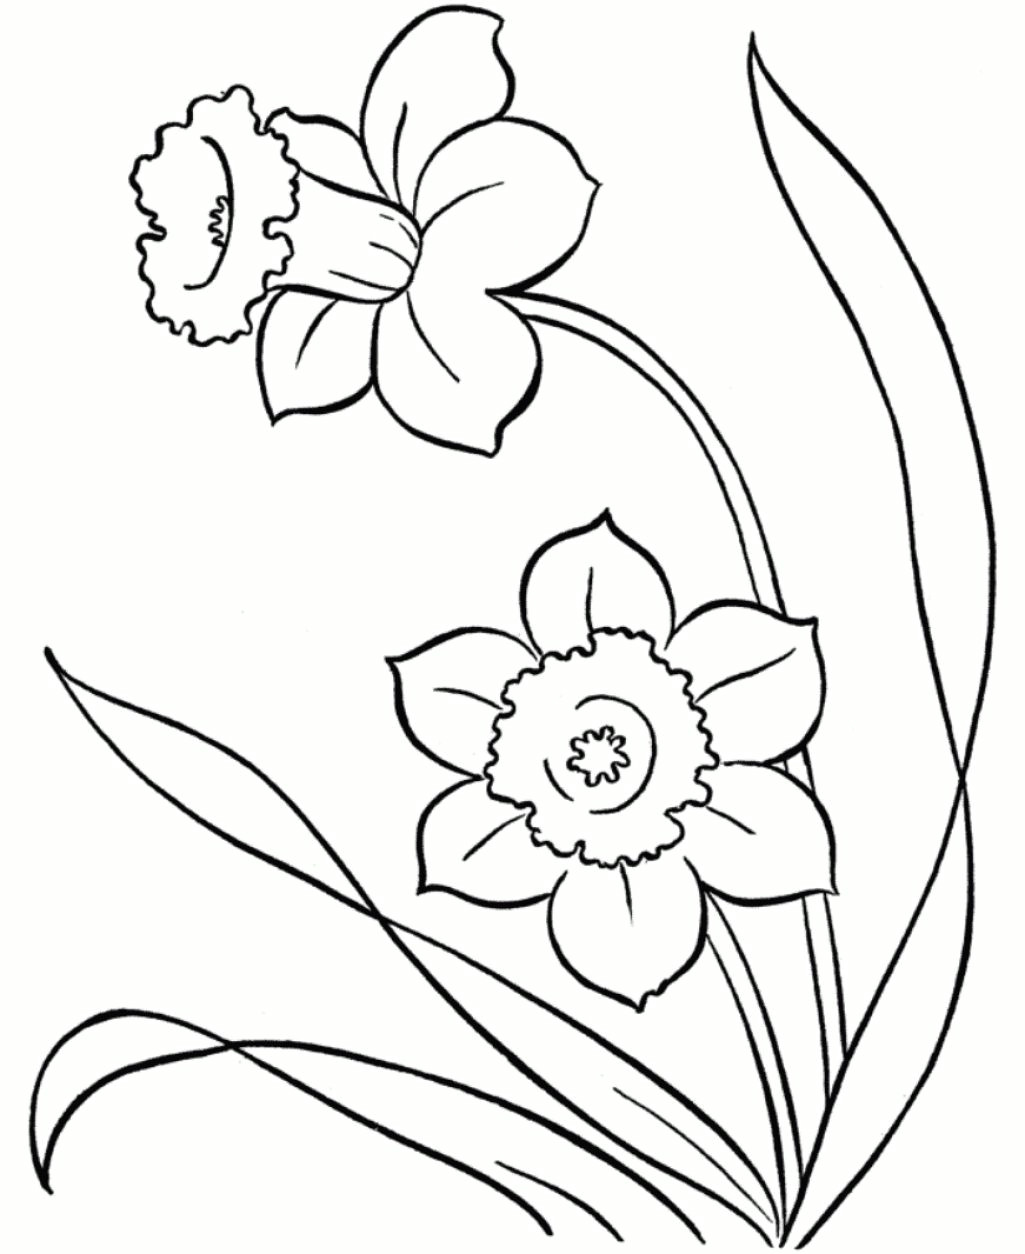 Drawings Of Spring Flowers Line Drawings Of Snowdrops Google Search Flower Outlines